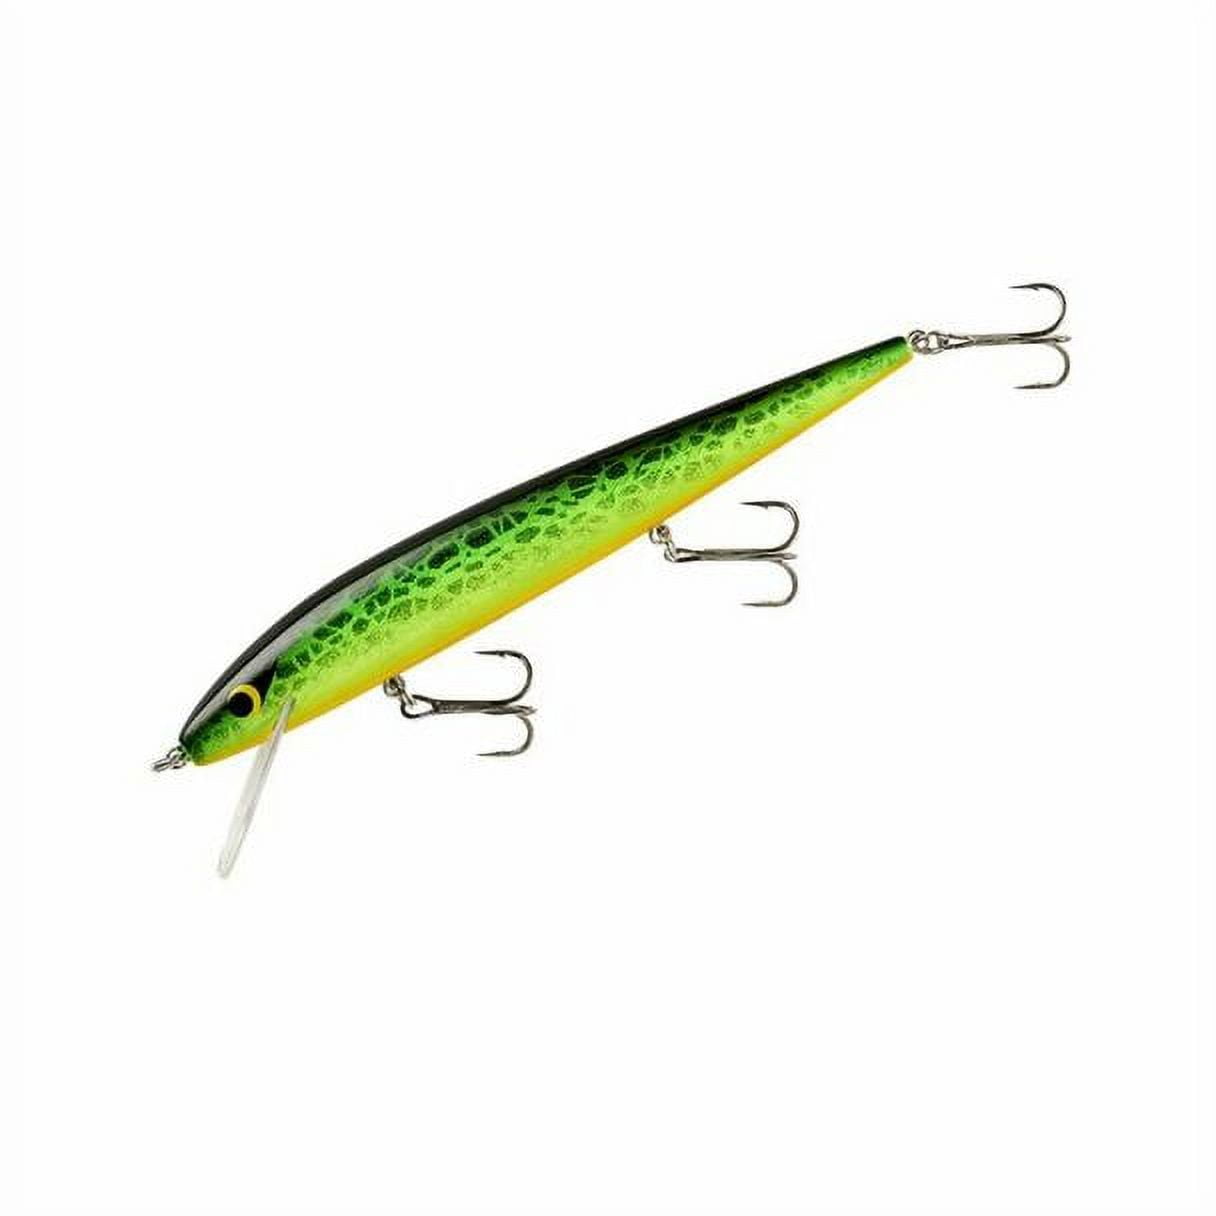 Smithwick Fishing Lure ADR5300 Perfect 10 ROGUE 5 1/2 5/8 oz Lacy Tiger  Suspend